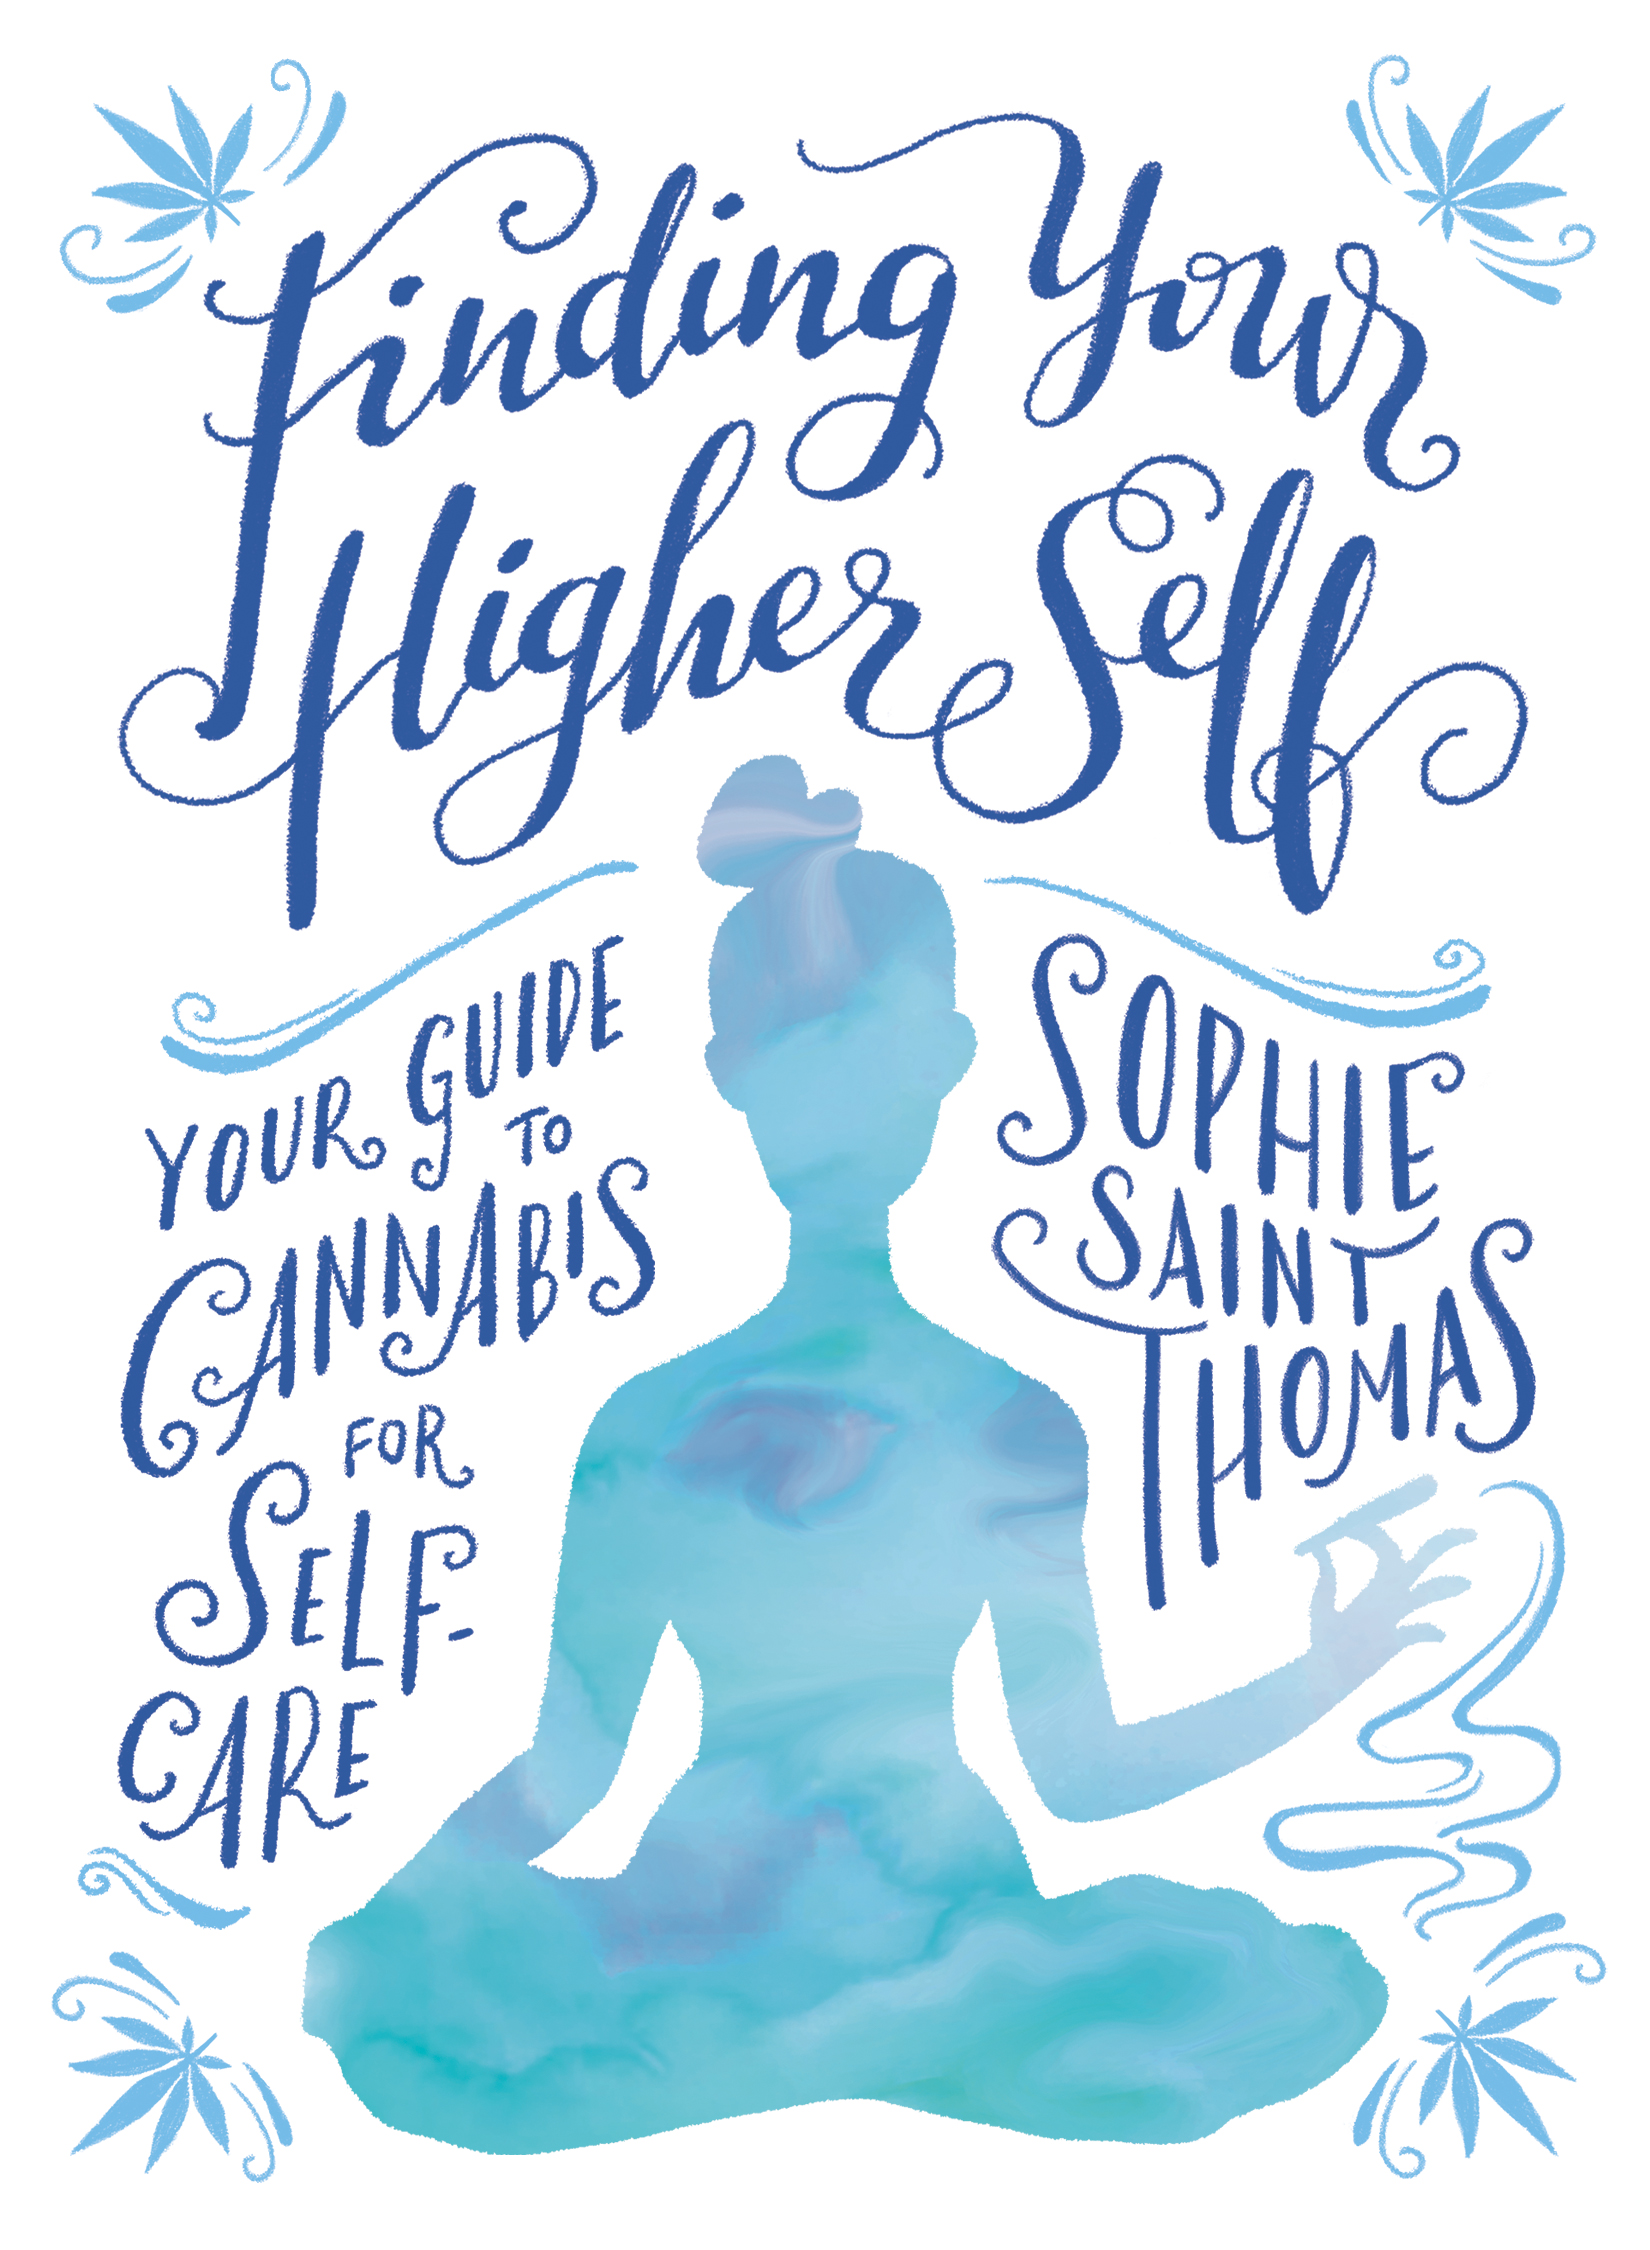 Finding Your Higher Self: Your Guide to Cannabis for Self-Care